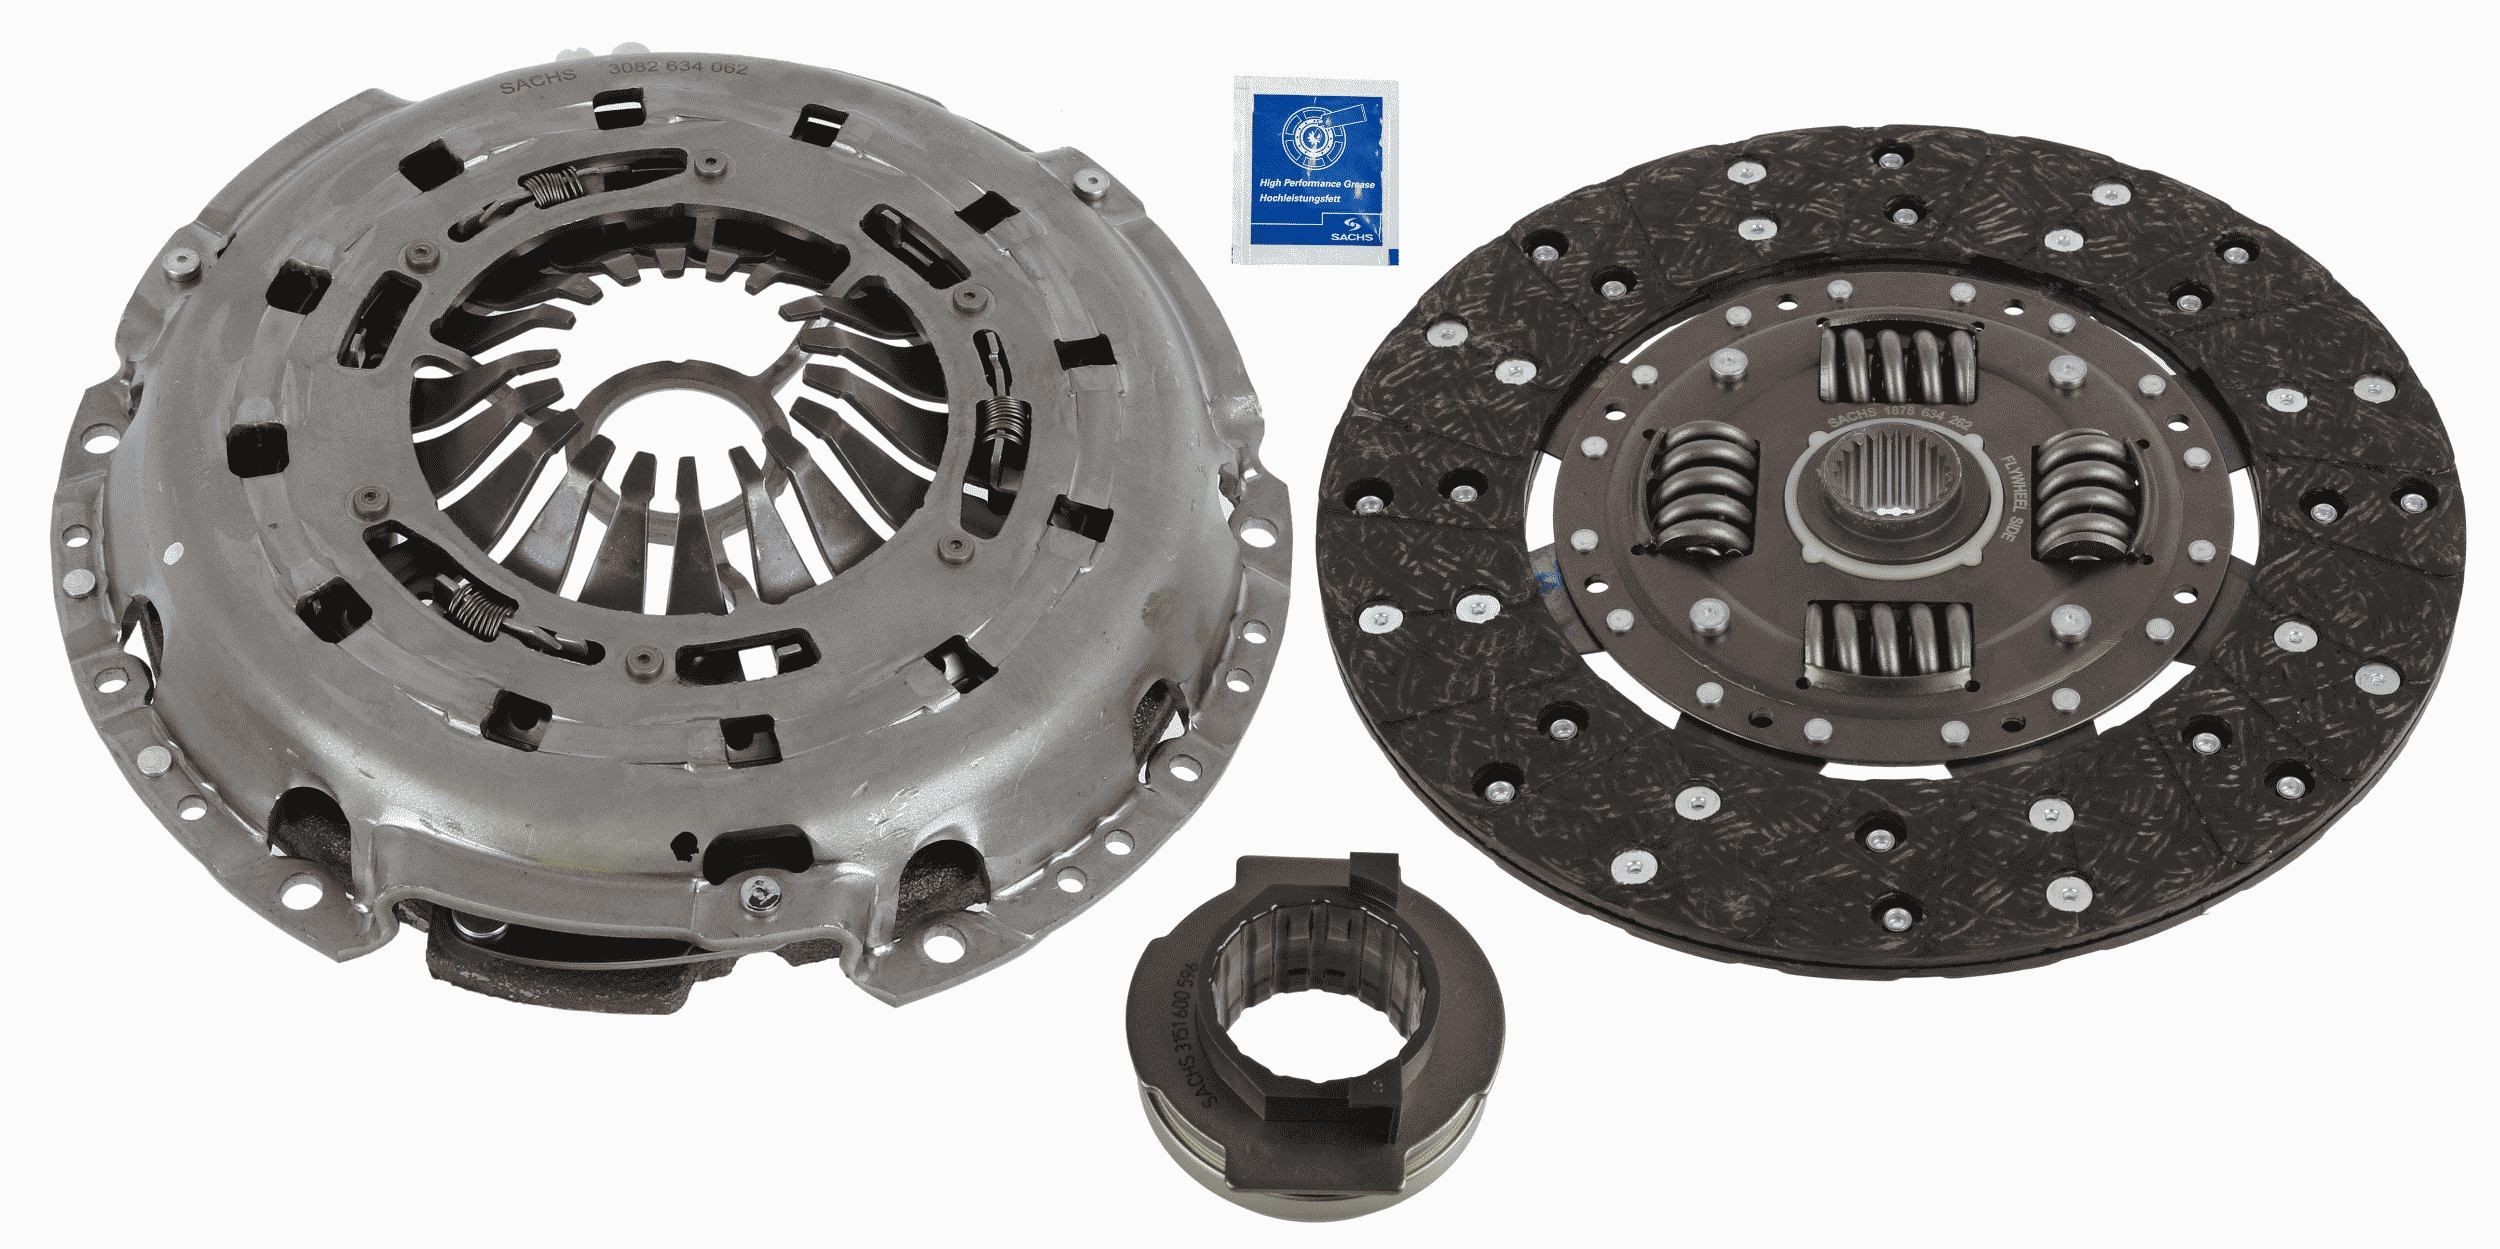 Original SACHS Clutch and flywheel kit 3000 951 662 for MAZDA CX-5